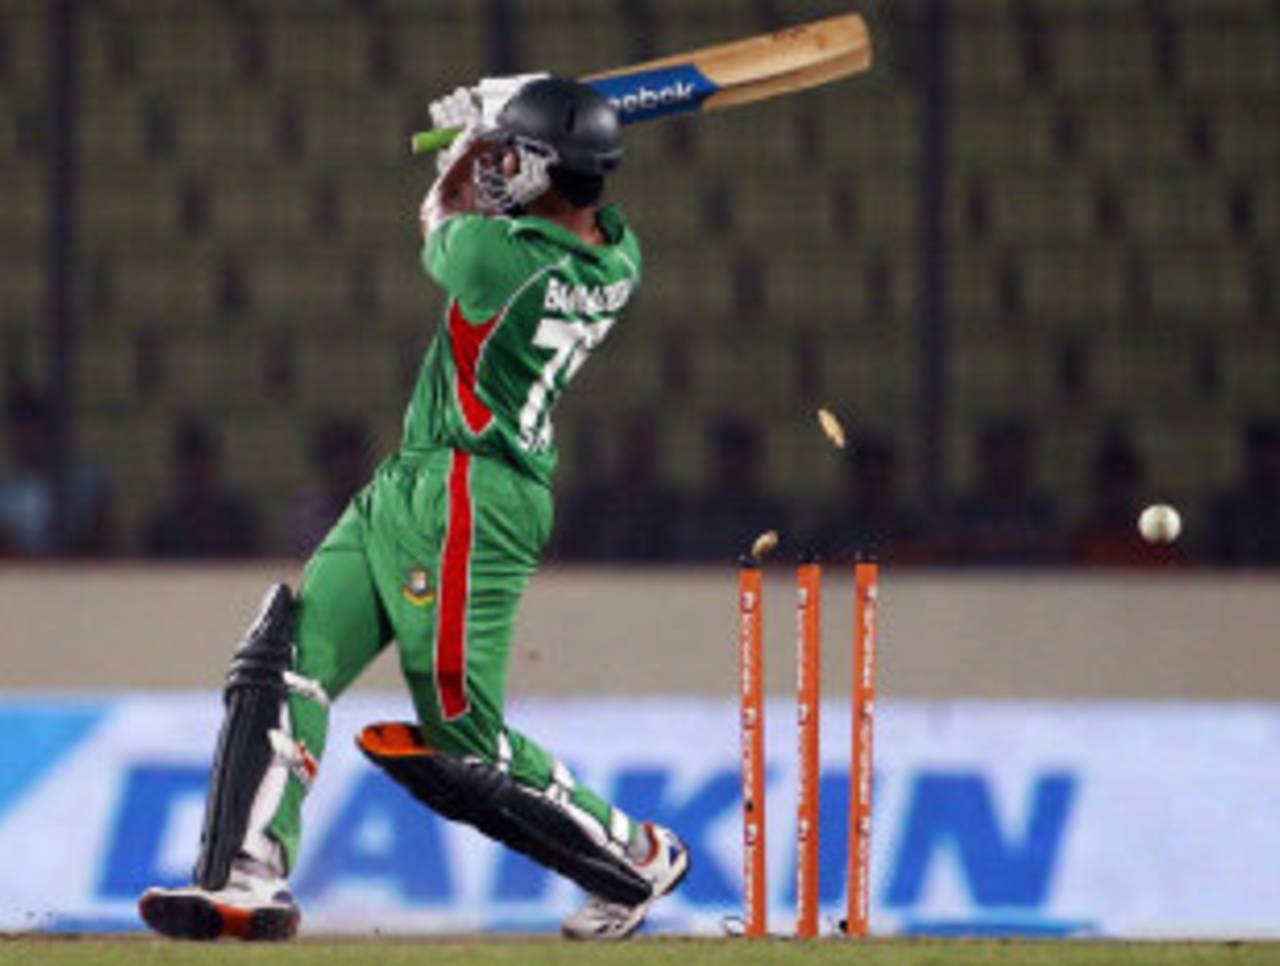 A controversy surrounding former Pakistan batsman Mohammad Yousuf's participation in the Dhaka Premier Division Cricket League has left Bangladesh domestic cricket in disarray&nbsp;&nbsp;&bull;&nbsp;&nbsp;Associated Press